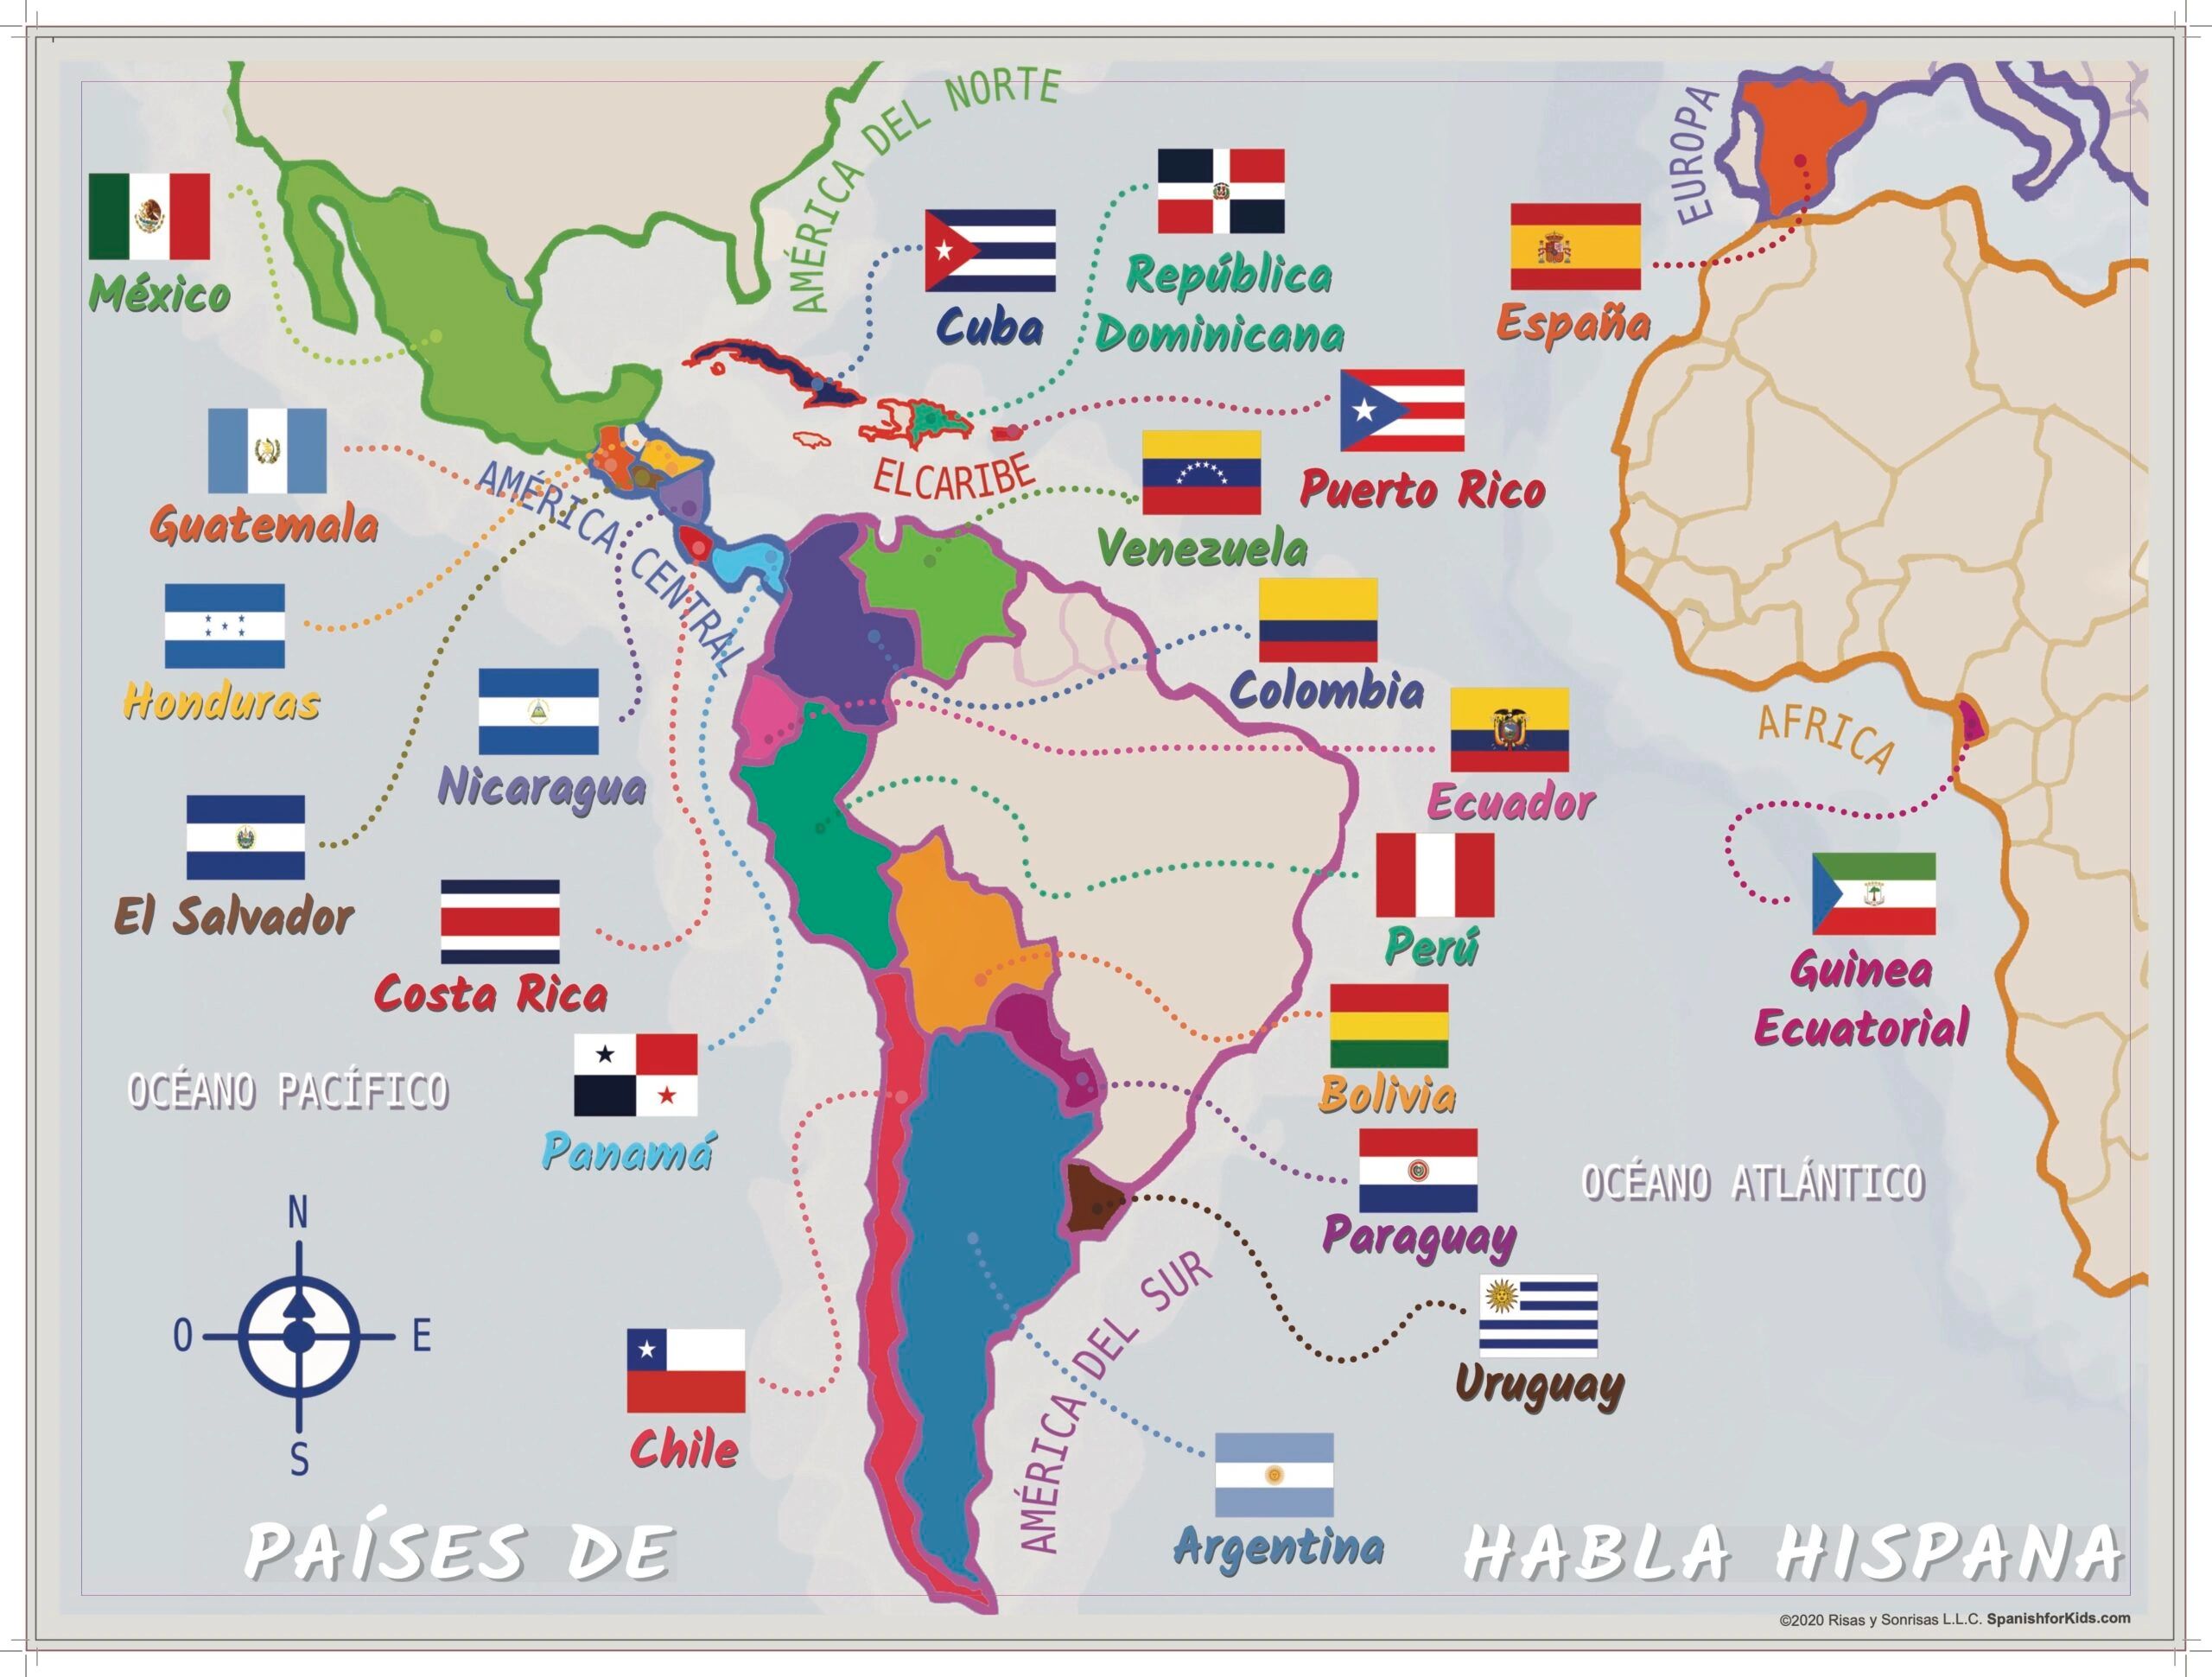 Learn Spanish for travel to these countries!